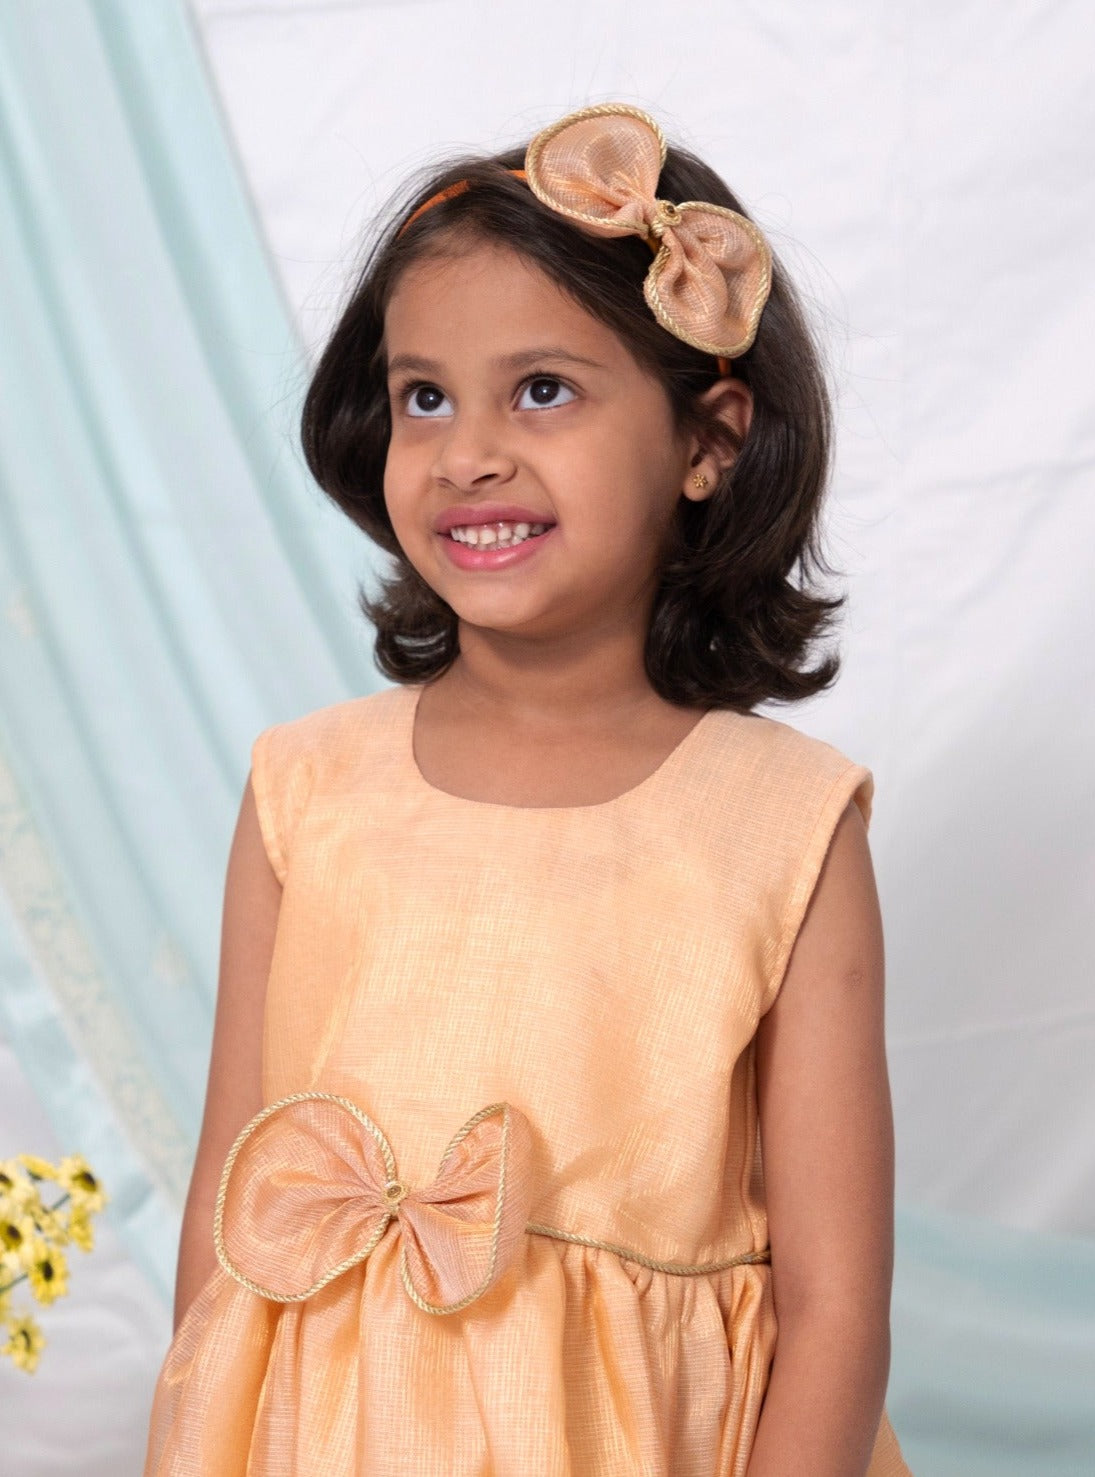 Peach tissue kotta silk sleeveless flared dress with statement embellished bow for Girl.Peach tissue kotta fabric has a subtle shimmer all over yet maintains a soft touch.The statement bow is highlighted with golden chord and waist belt has cute flowers detailing at the ends.